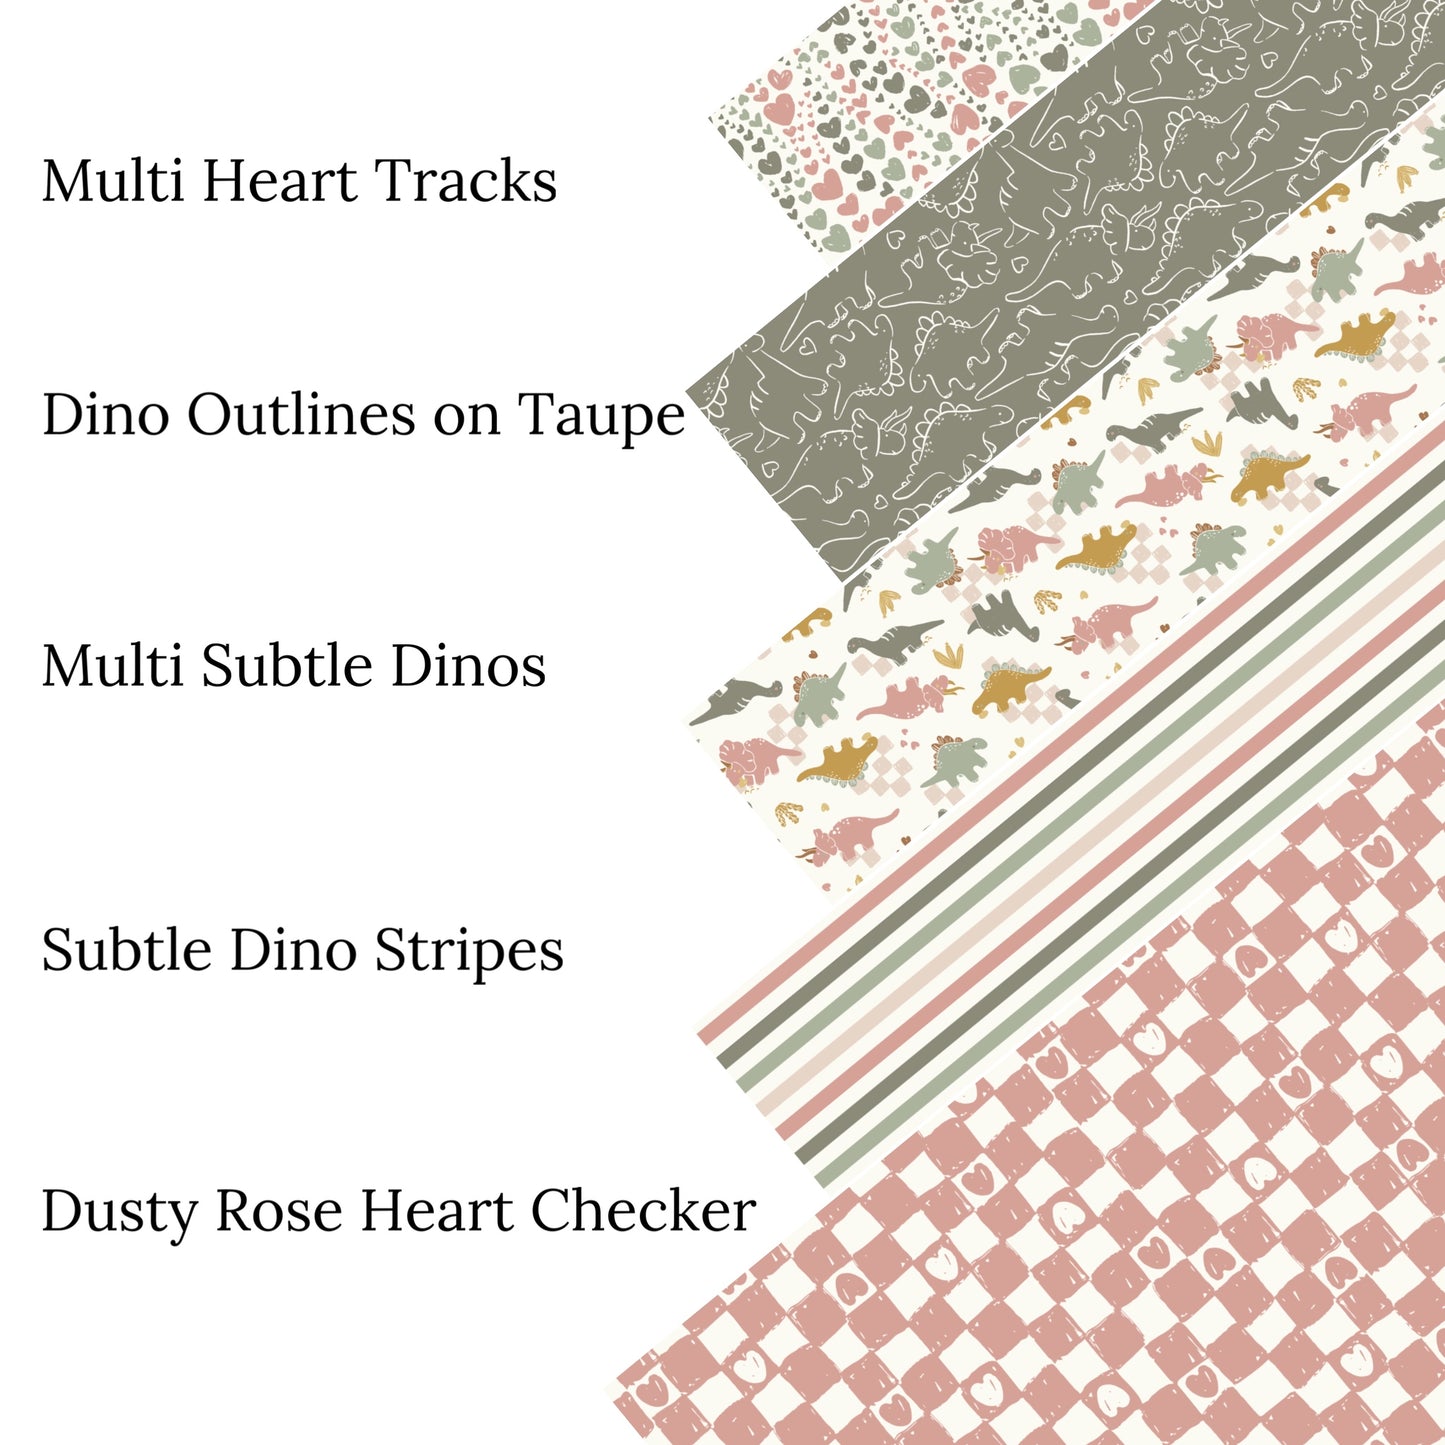 Dusty Rose Heart Checker Faux Leather Sheets